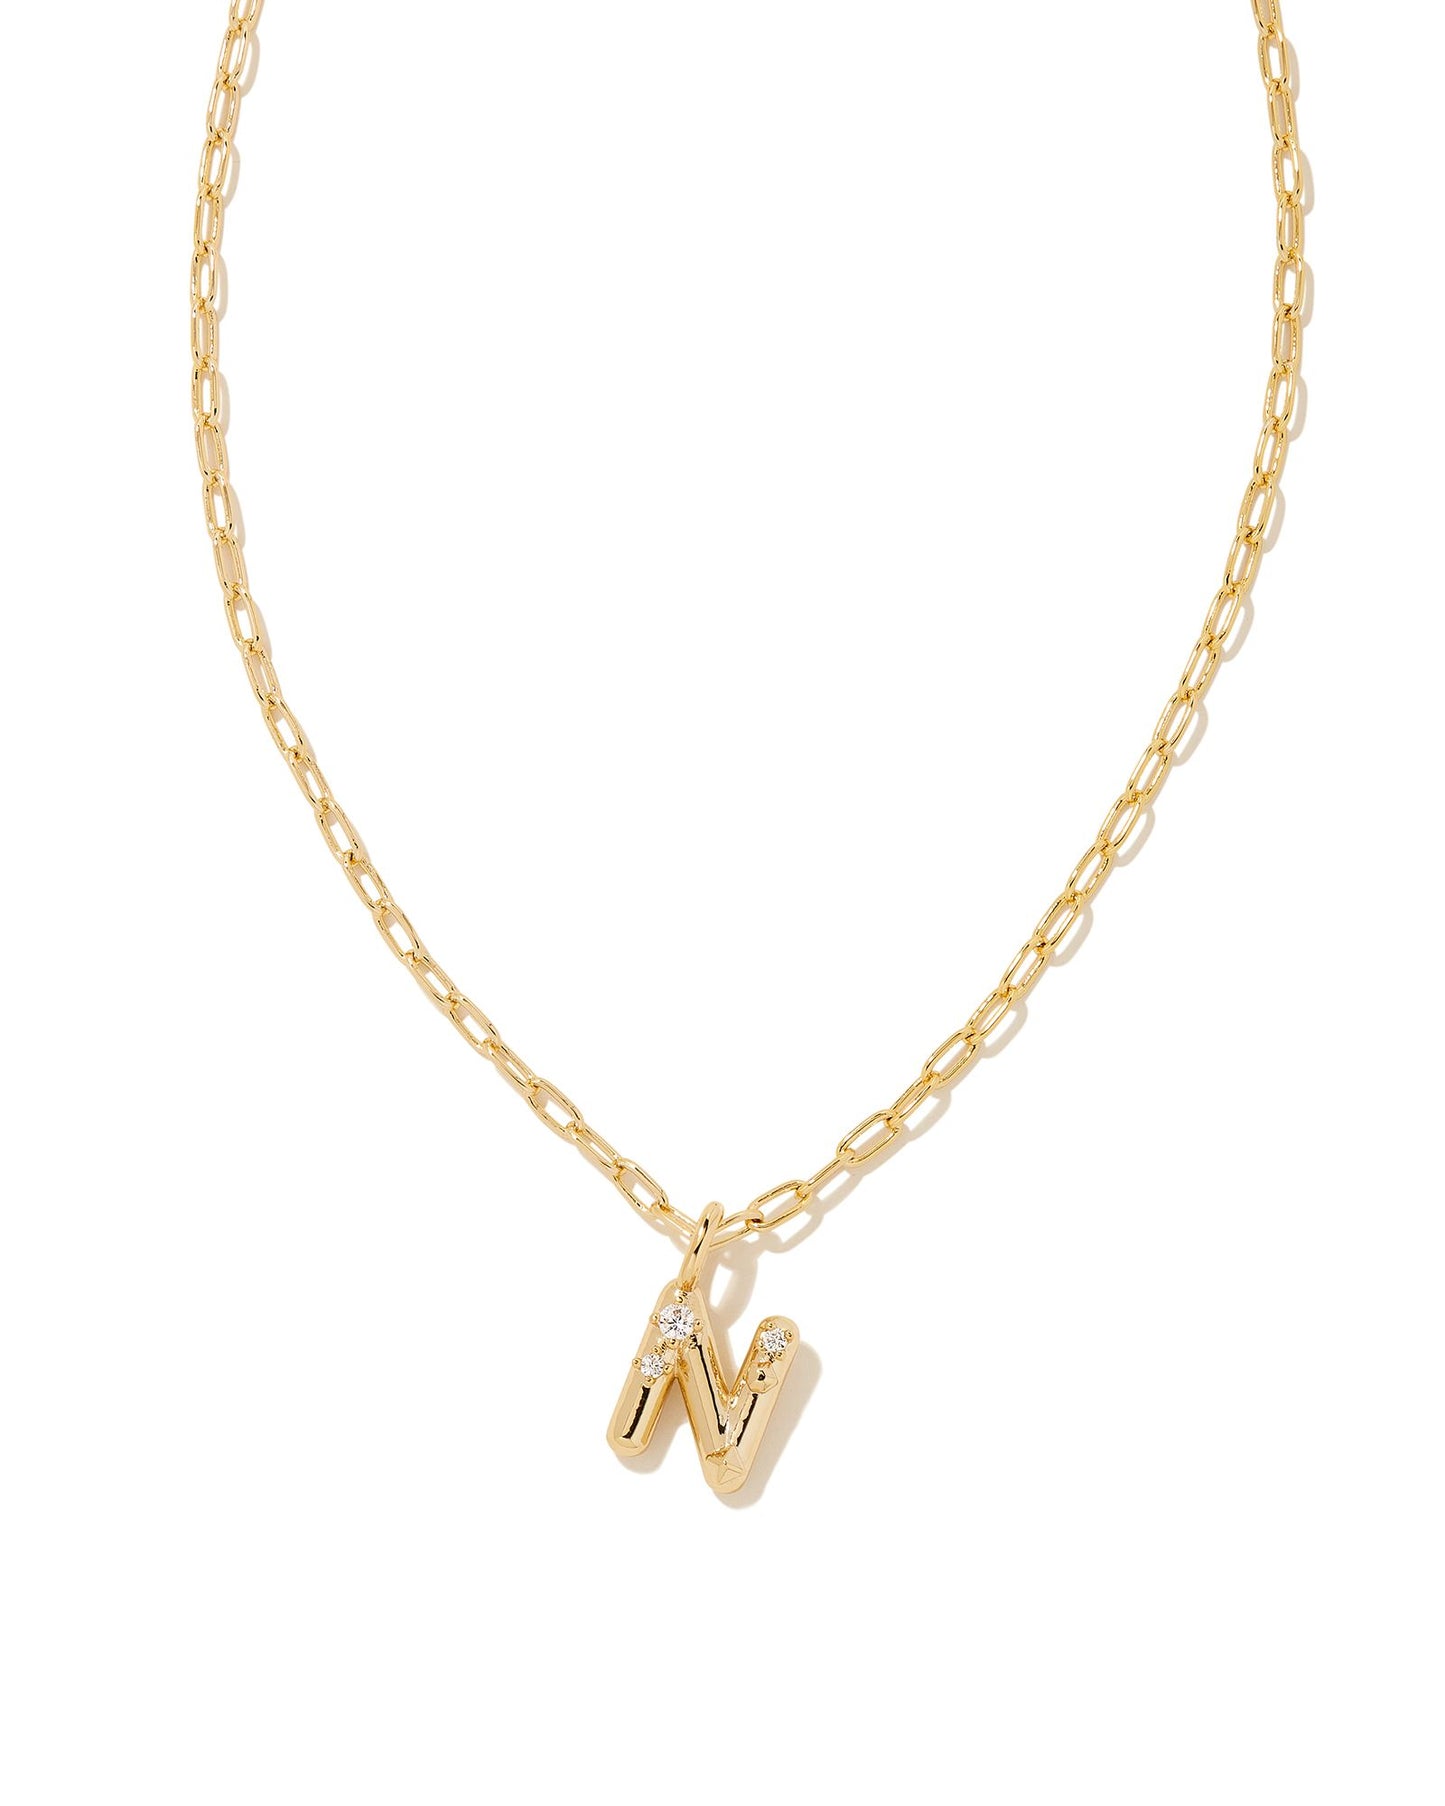 Personalize your everyday look with the Crystal Letter Short Pendant Necklace in White Crystal. Whether you’re rocking your initial or a loved one’s, this sentimental layer is one you’ll keep coming back to again and again.  Dimensions- 16' CHAIN WITH 3' EXTENDER, 0.62'L X 0.35"W PENDANT Metal- 14K Gold plated over brass Closure- Lobster Clasp Material-   White CZ Letter N